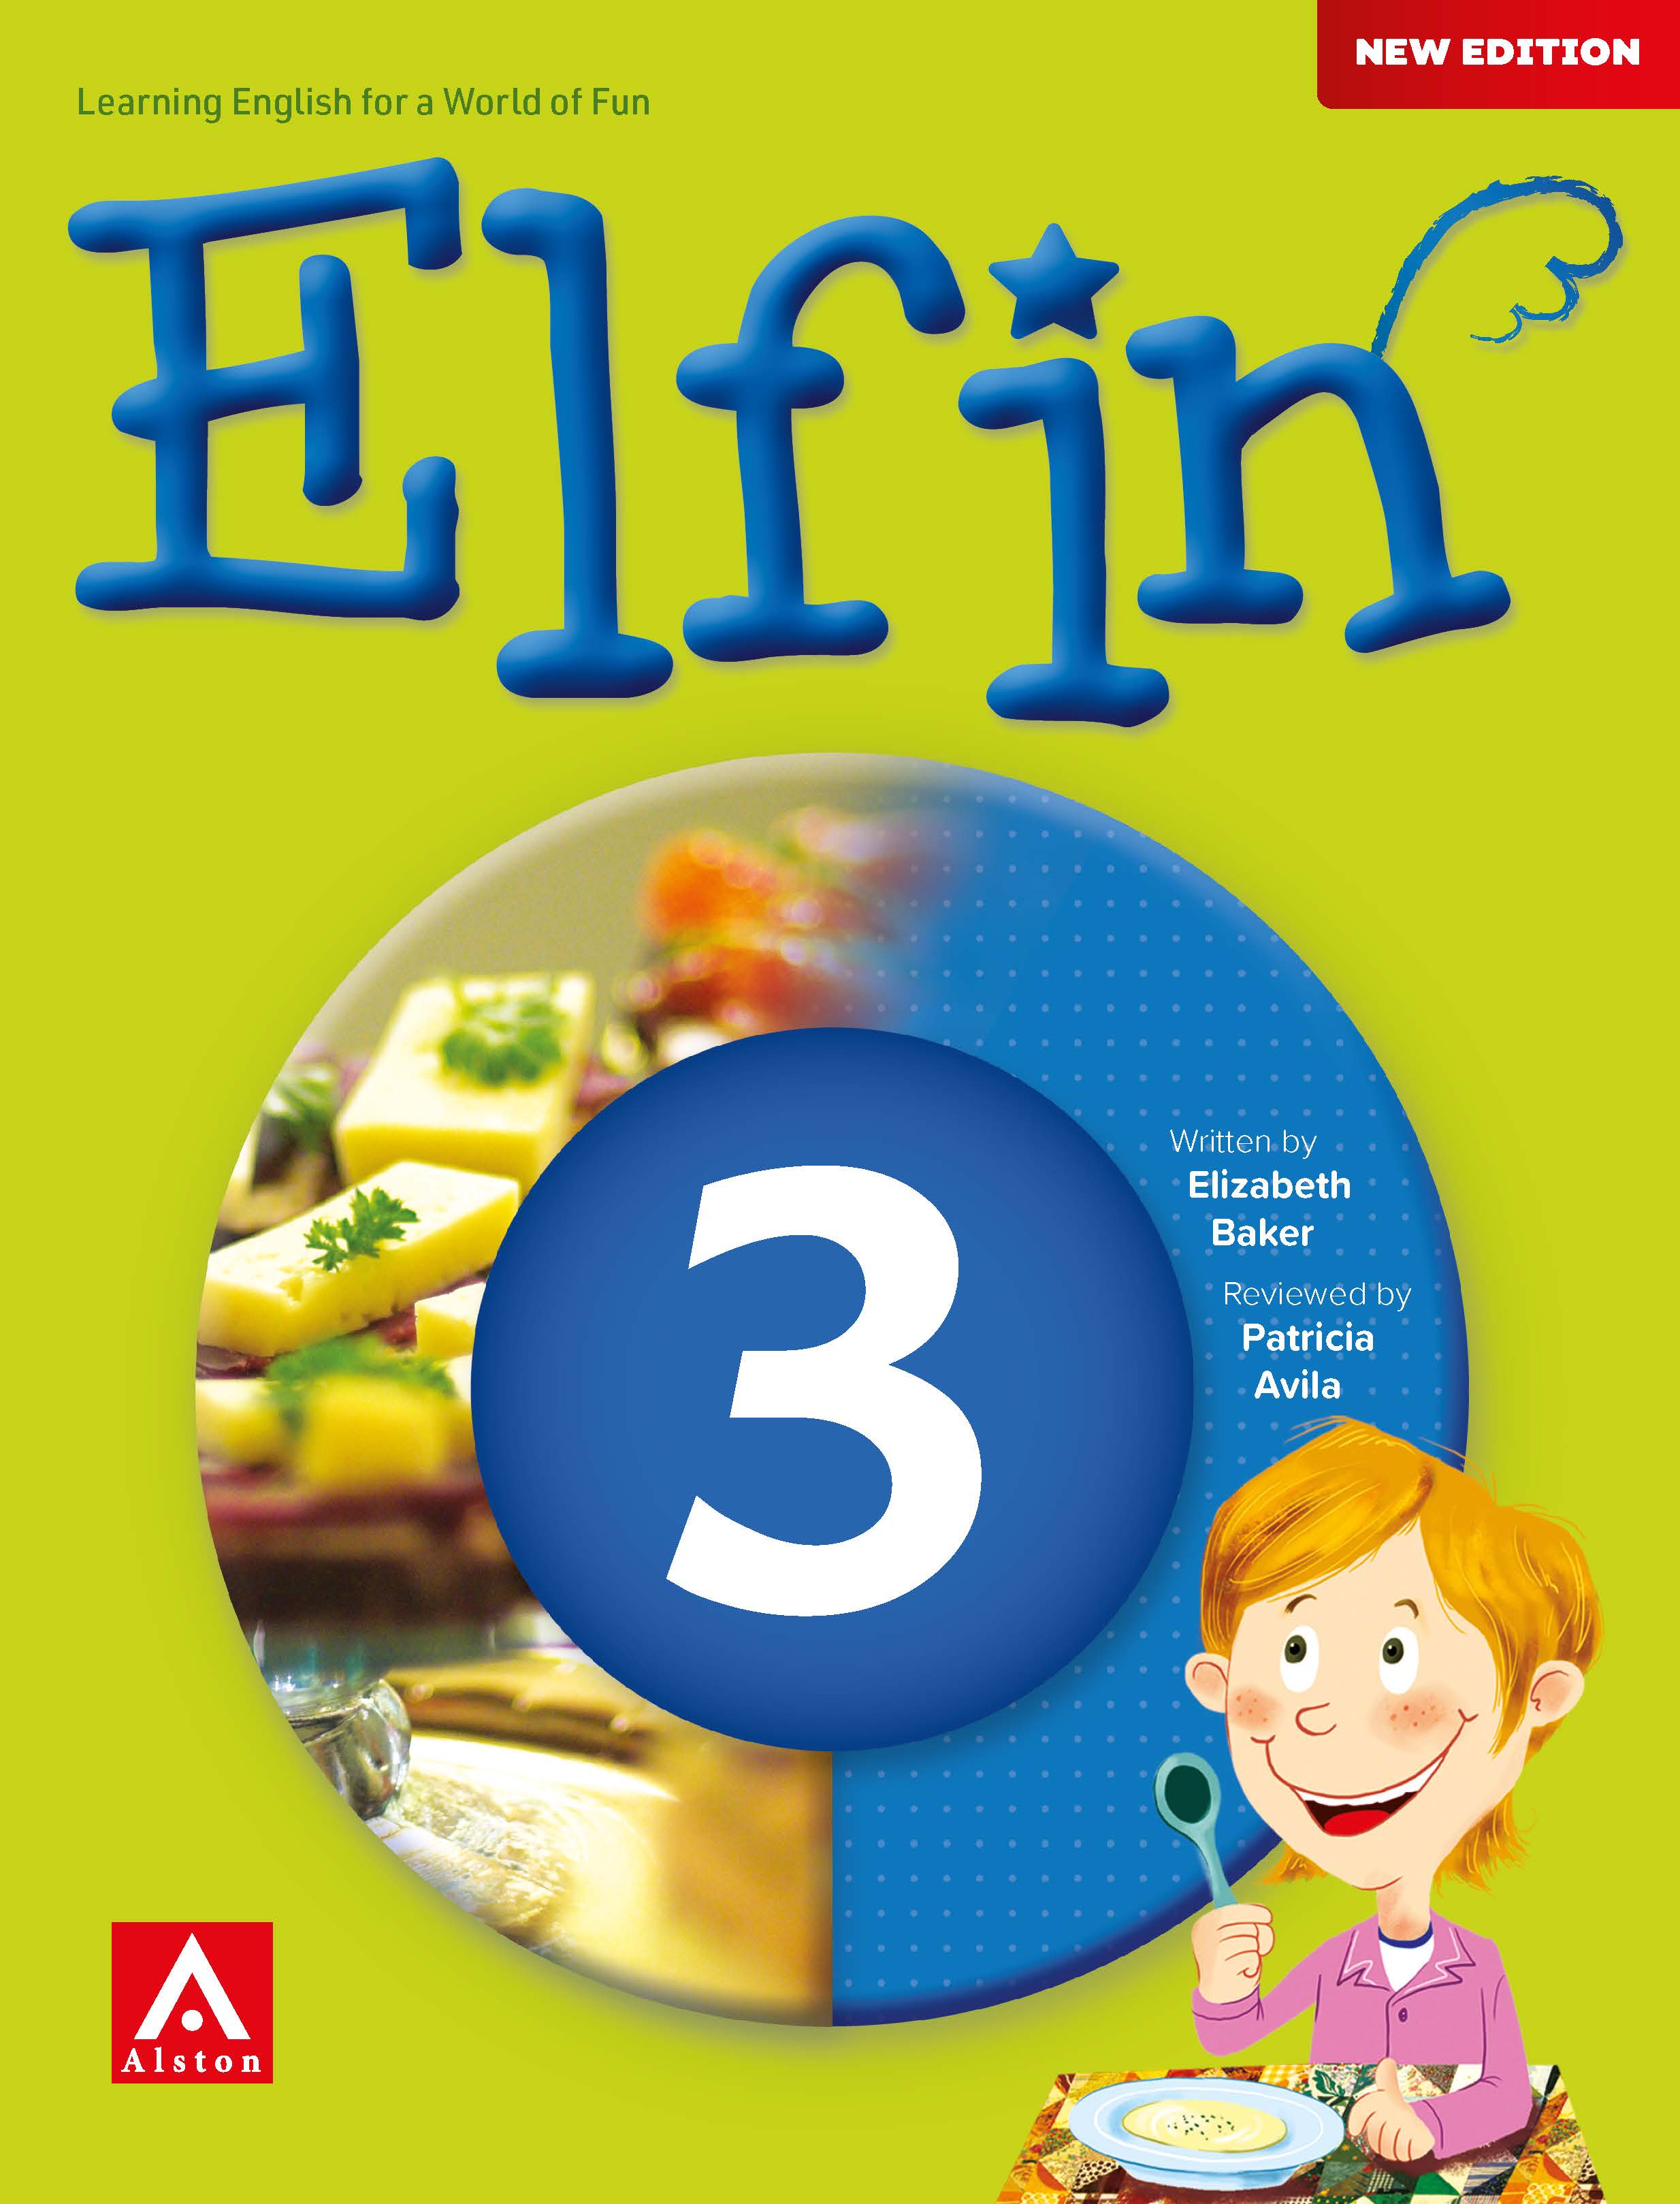 Elfin New Edition Cover SB TG 1 6 Page 03